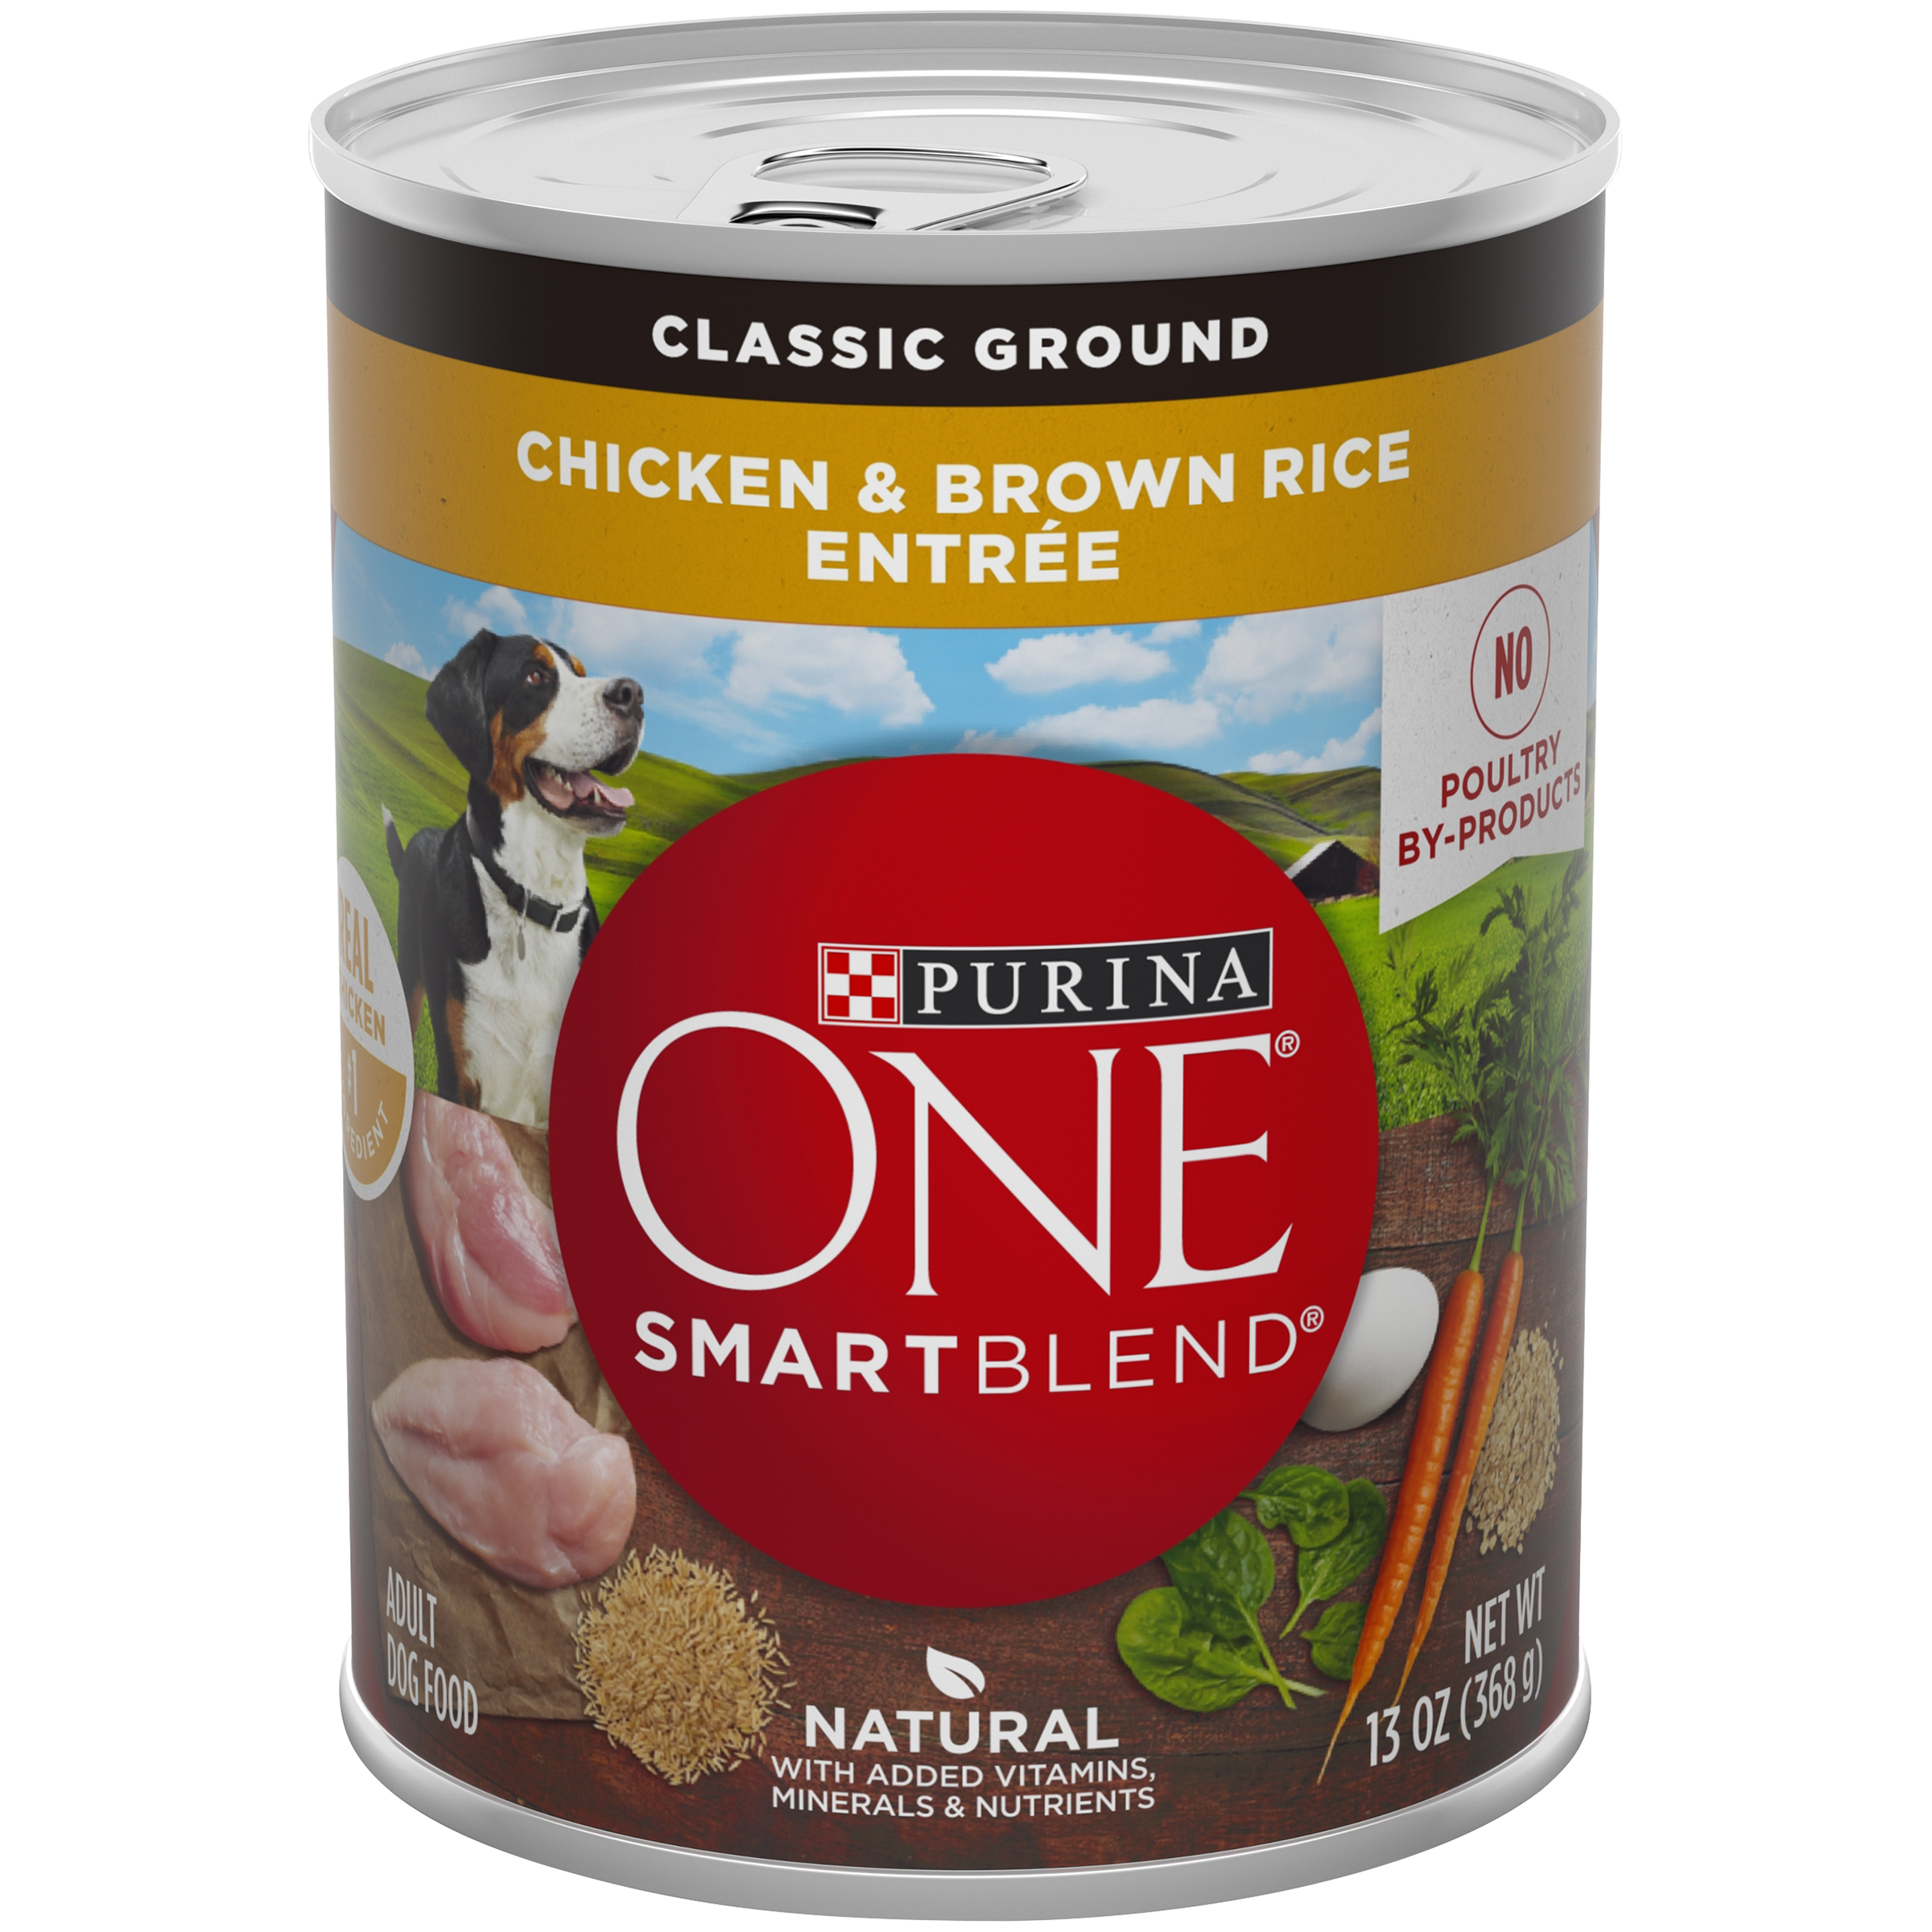 Purina ONE Dog Food, Wholesome Chicken & Brown Rice Entree, 13 oz (368 g)